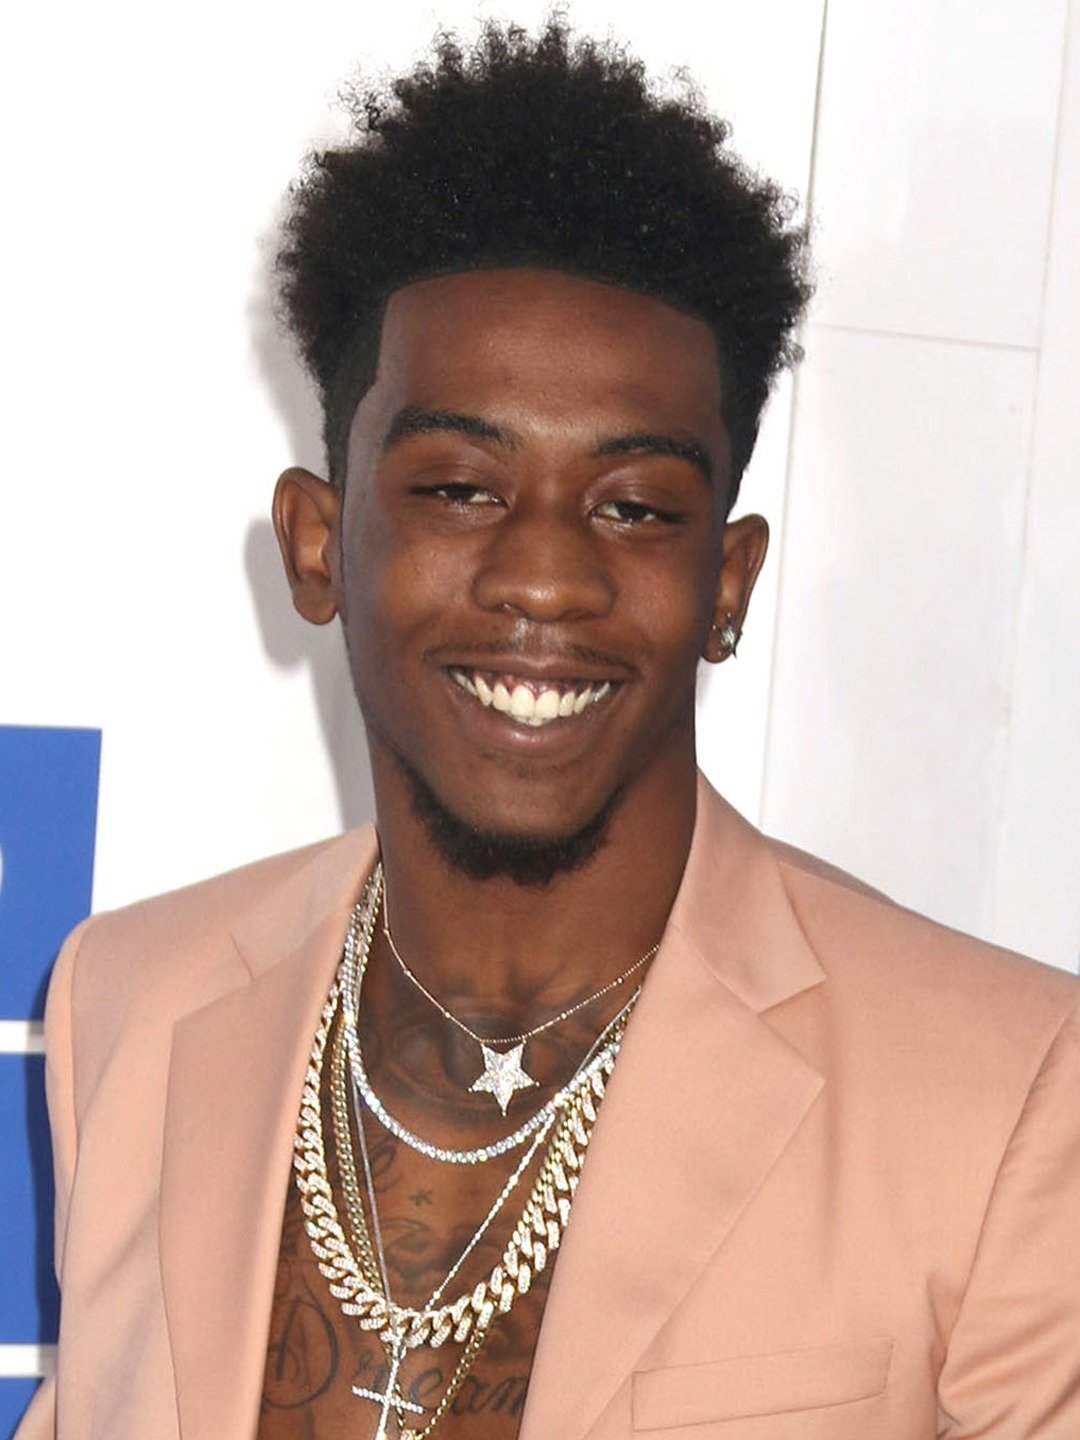 How tall is Desiigner?